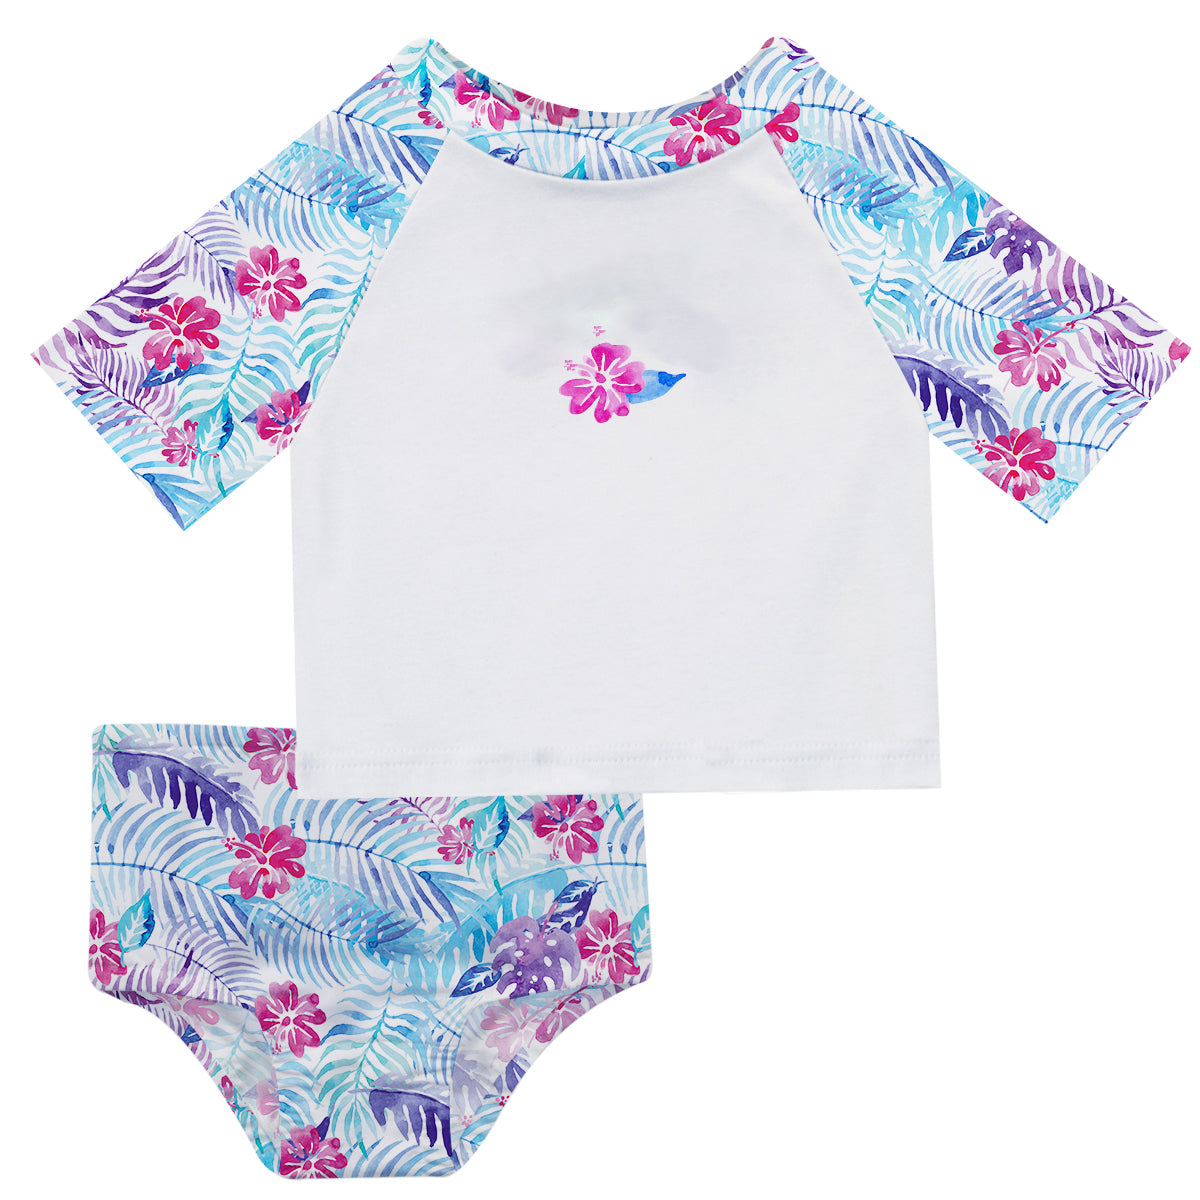 Leaves and Flowers Print Name White 2pc Short Sleeve Rash Guard - Wimziy&Co.